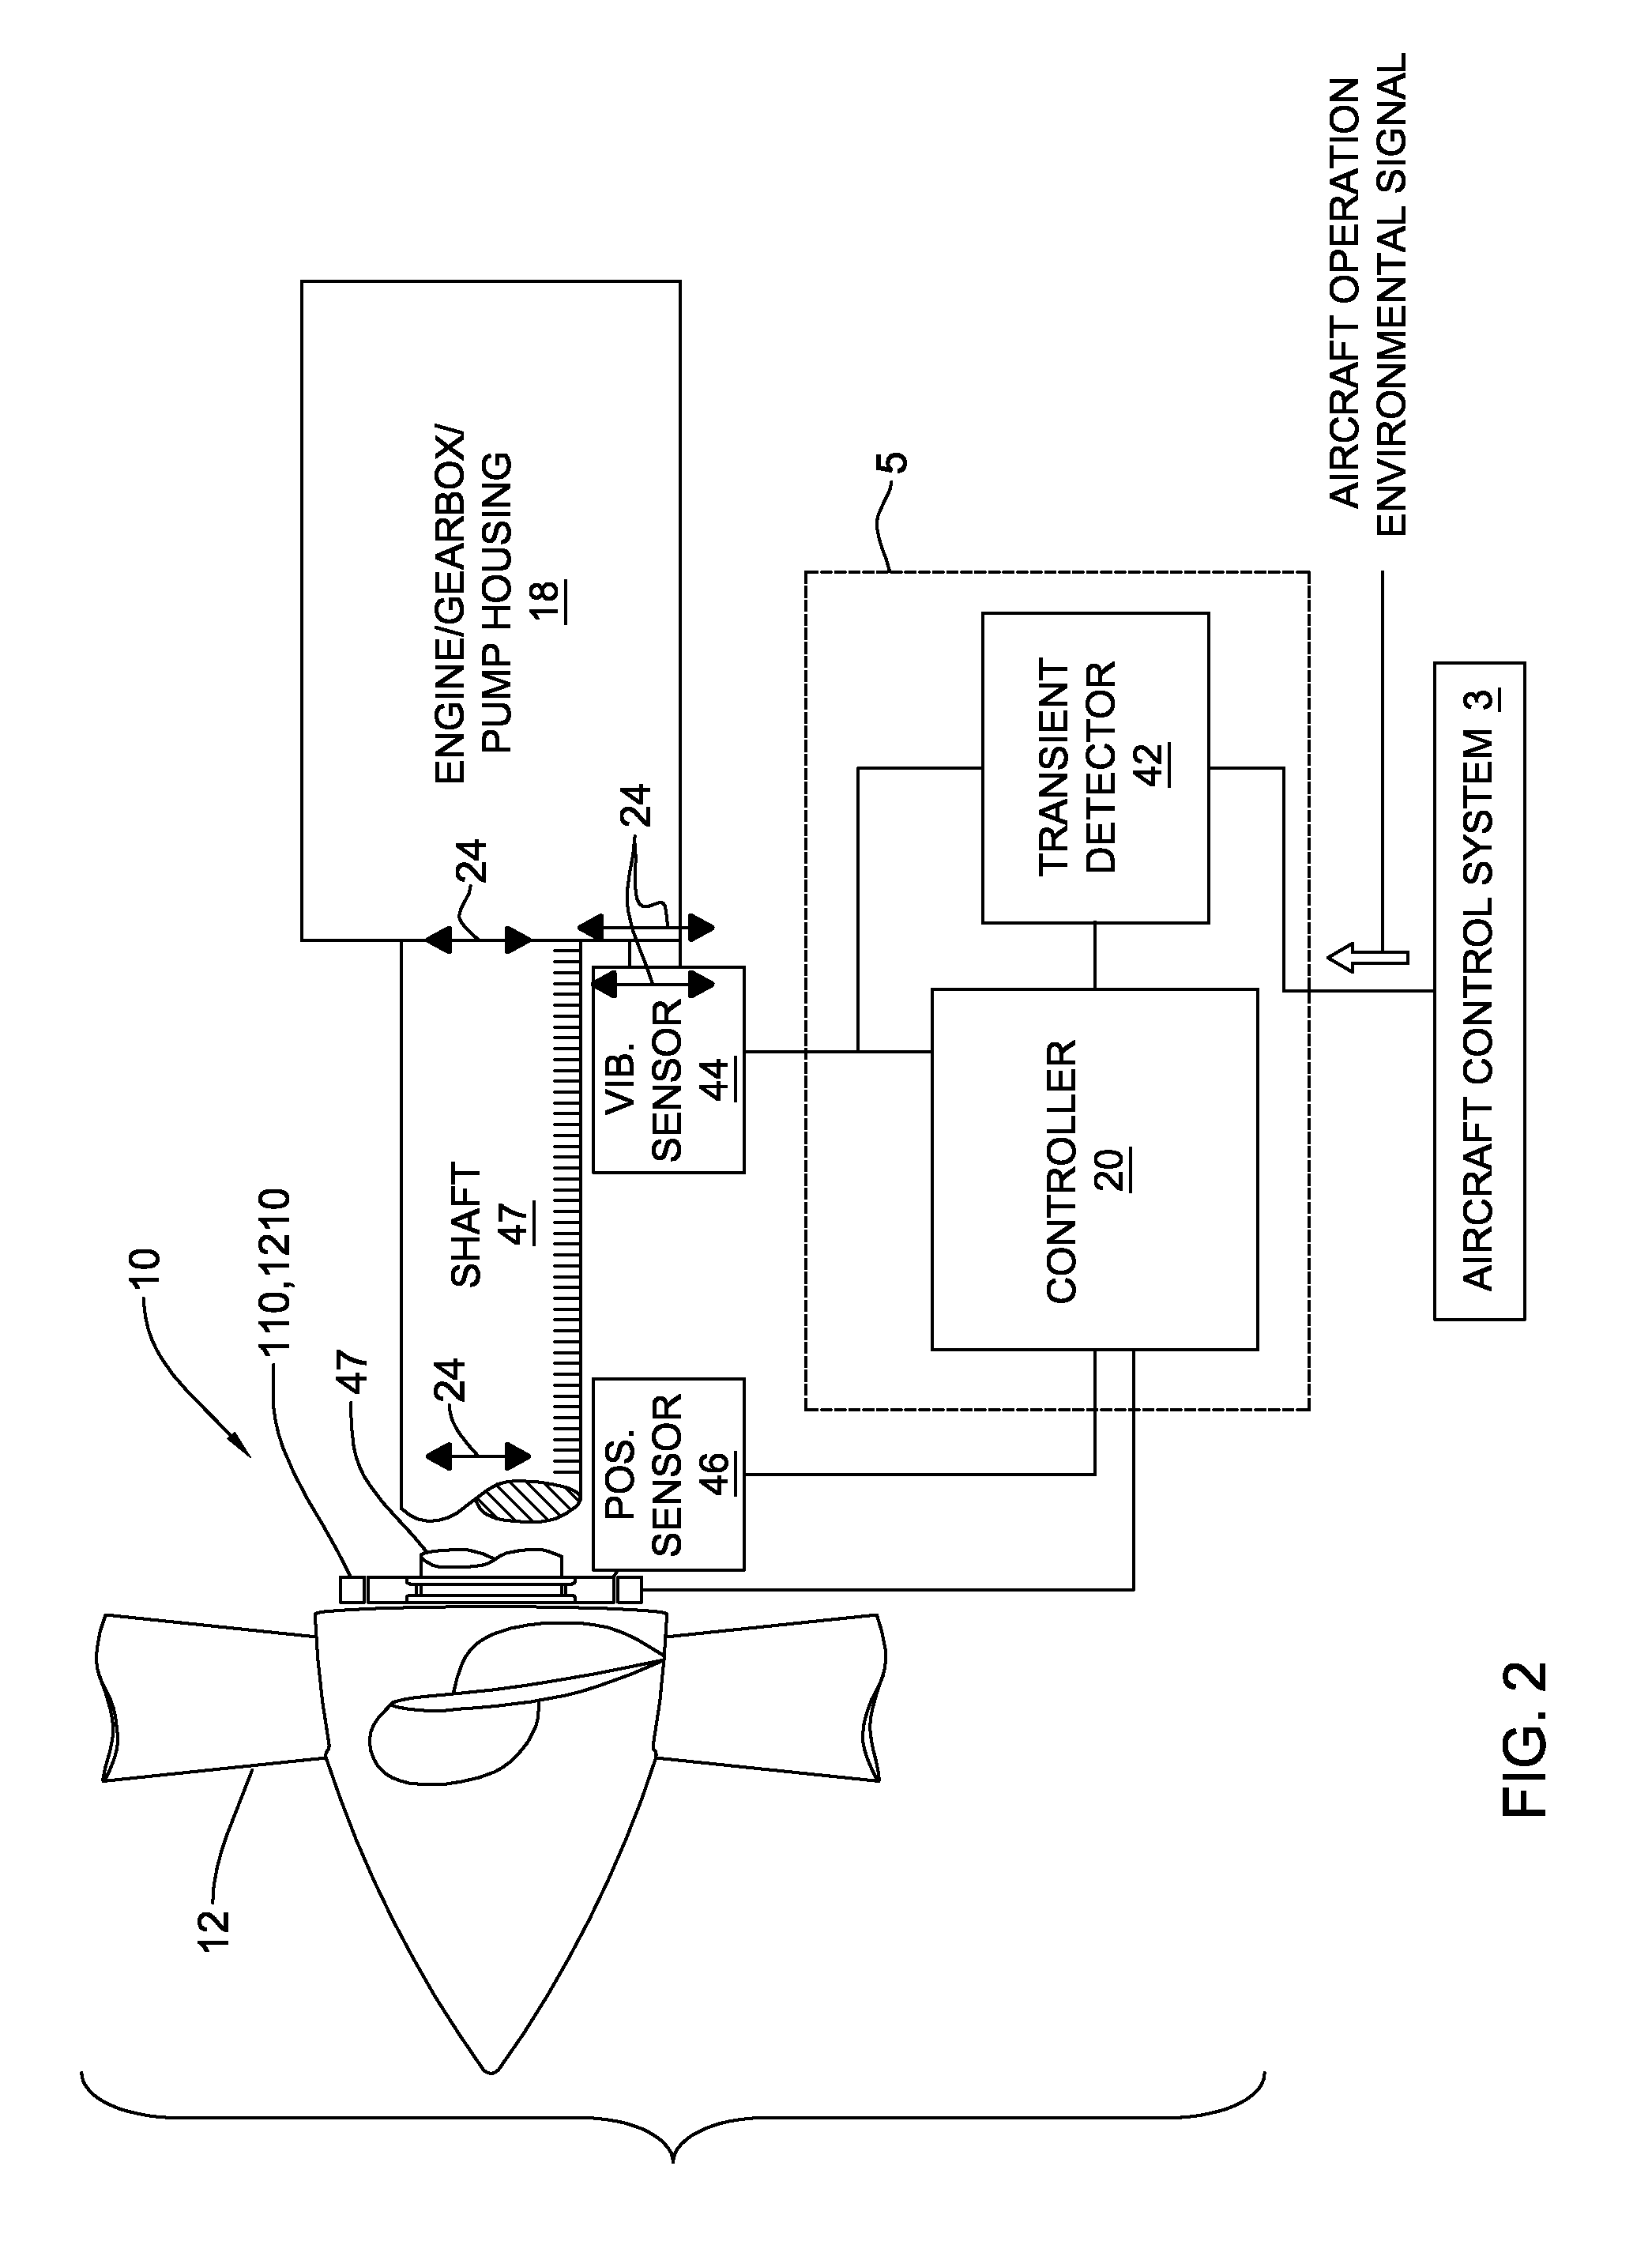 Aircraft with transient-discriminating propeller balancing system